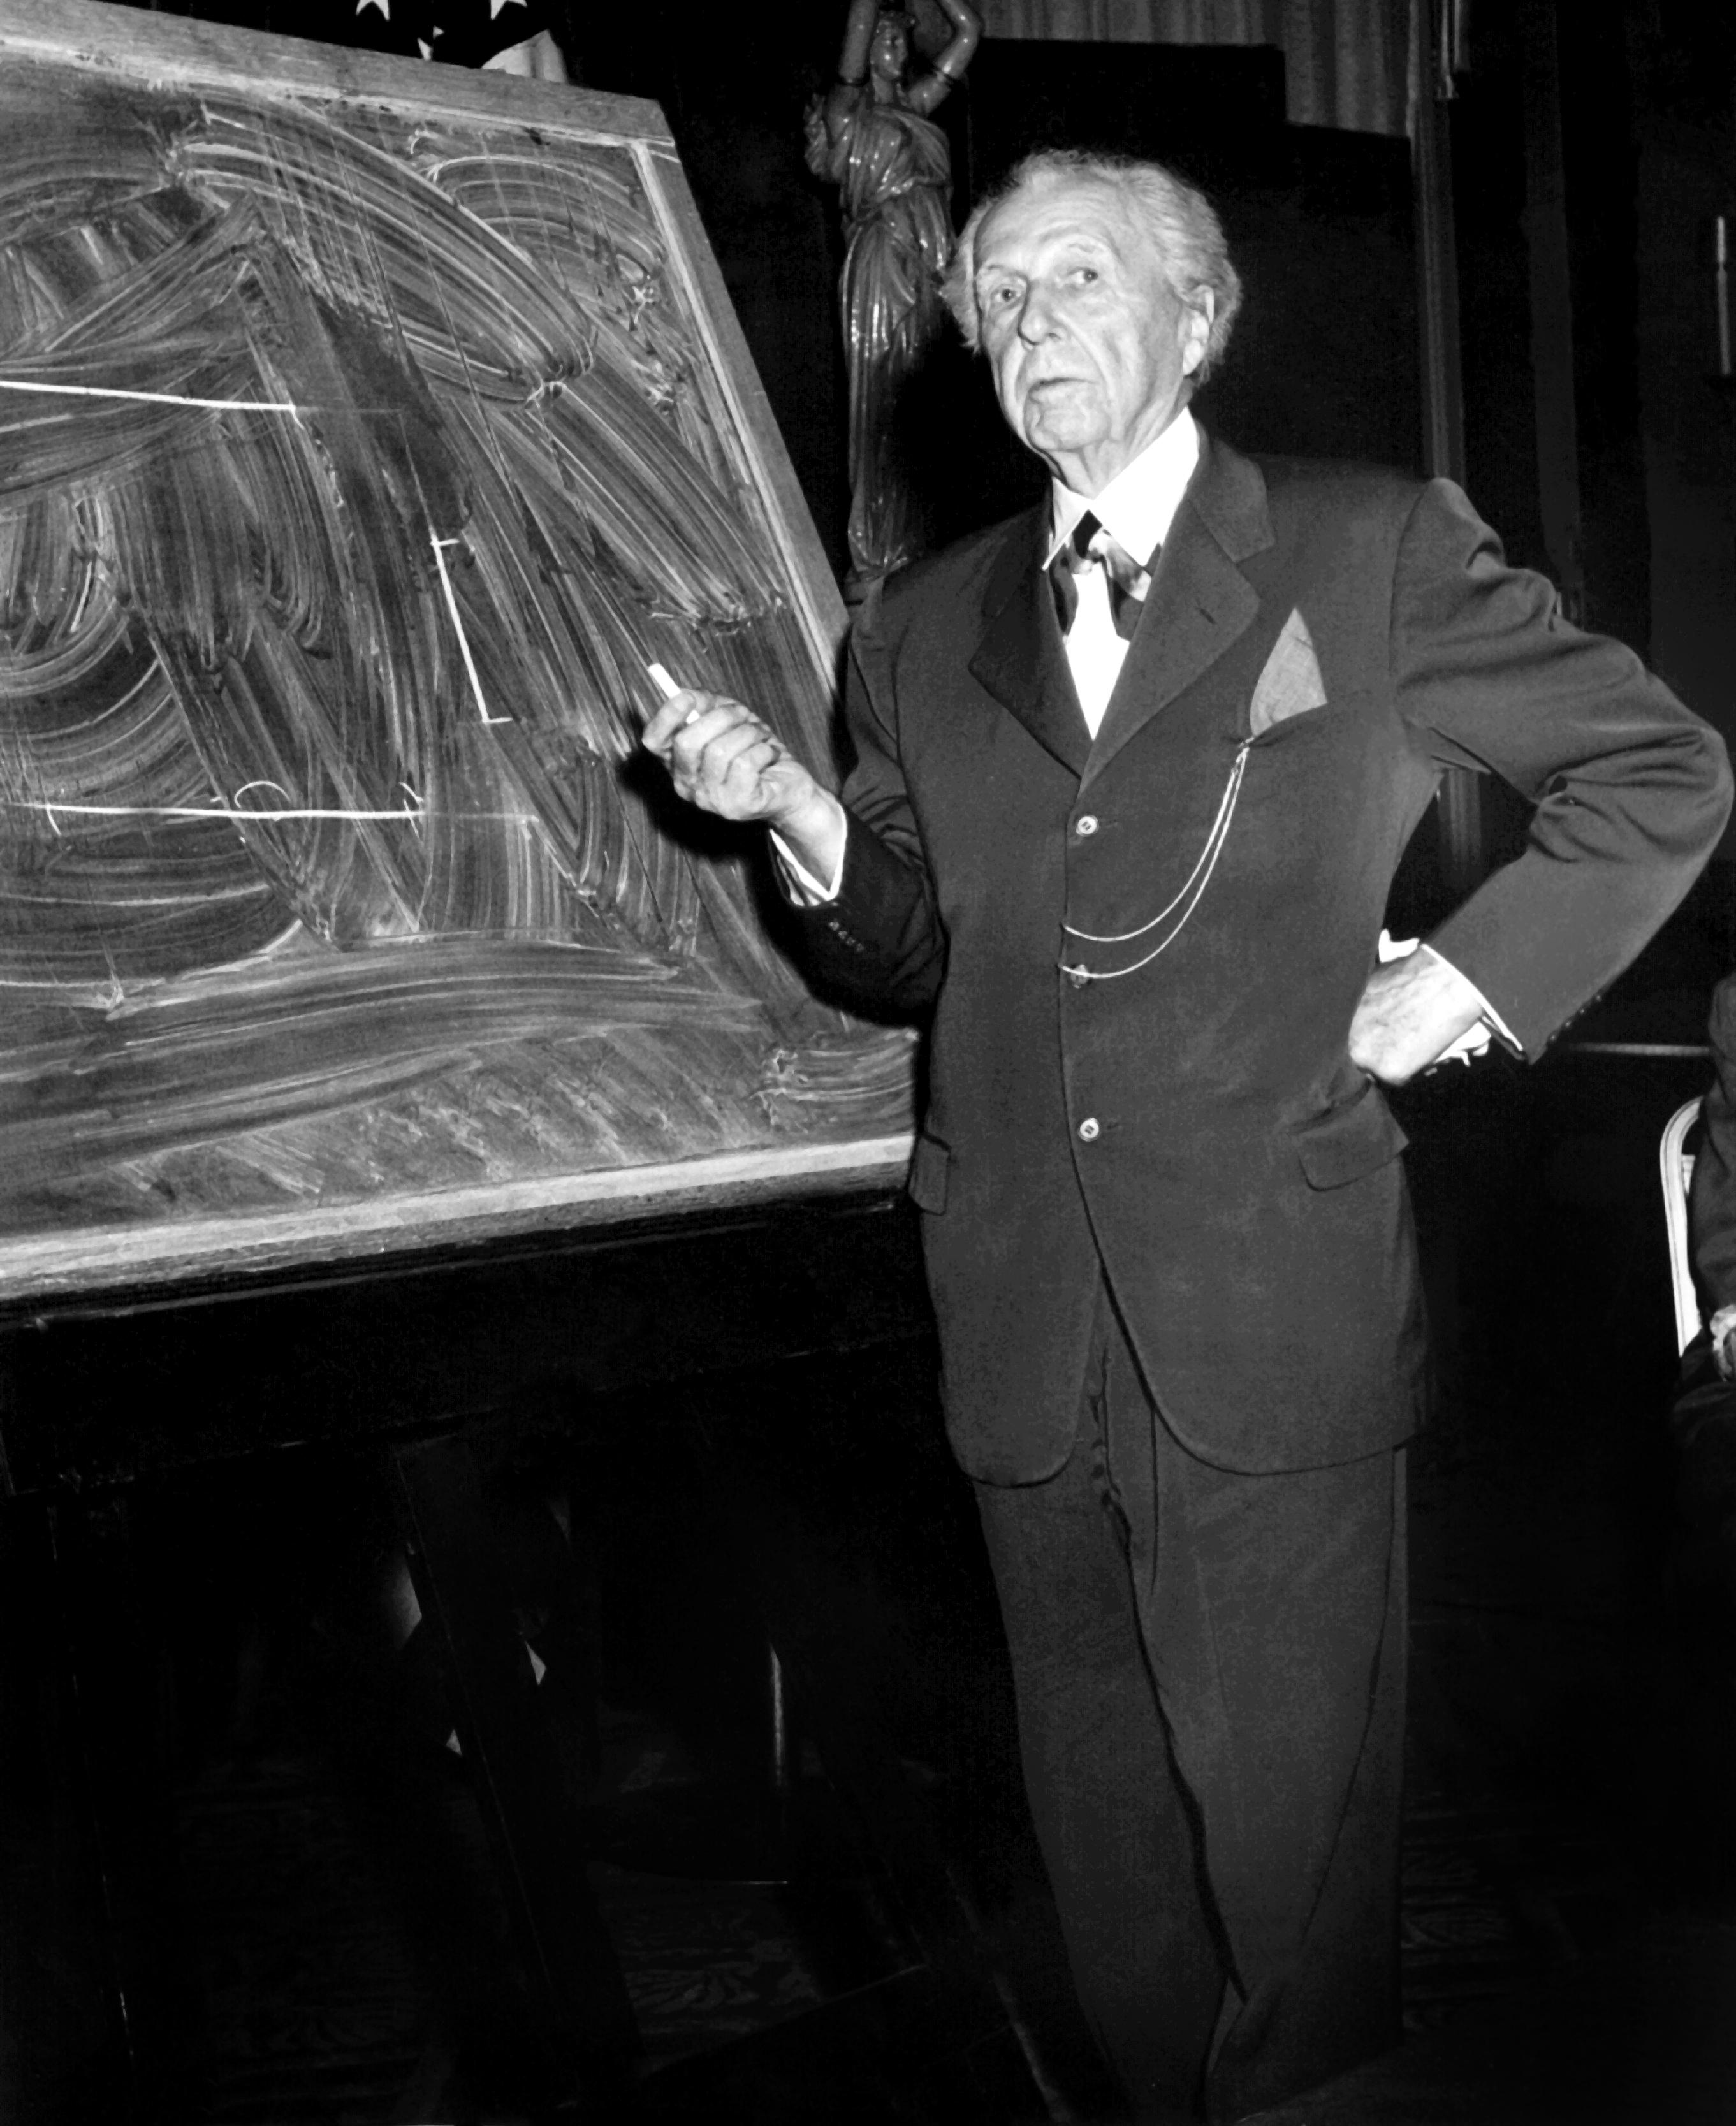 Fred Stein Black and White Photograph - Frank Lloyd Wright with Chalkboard Globe Photos Fine Art Print